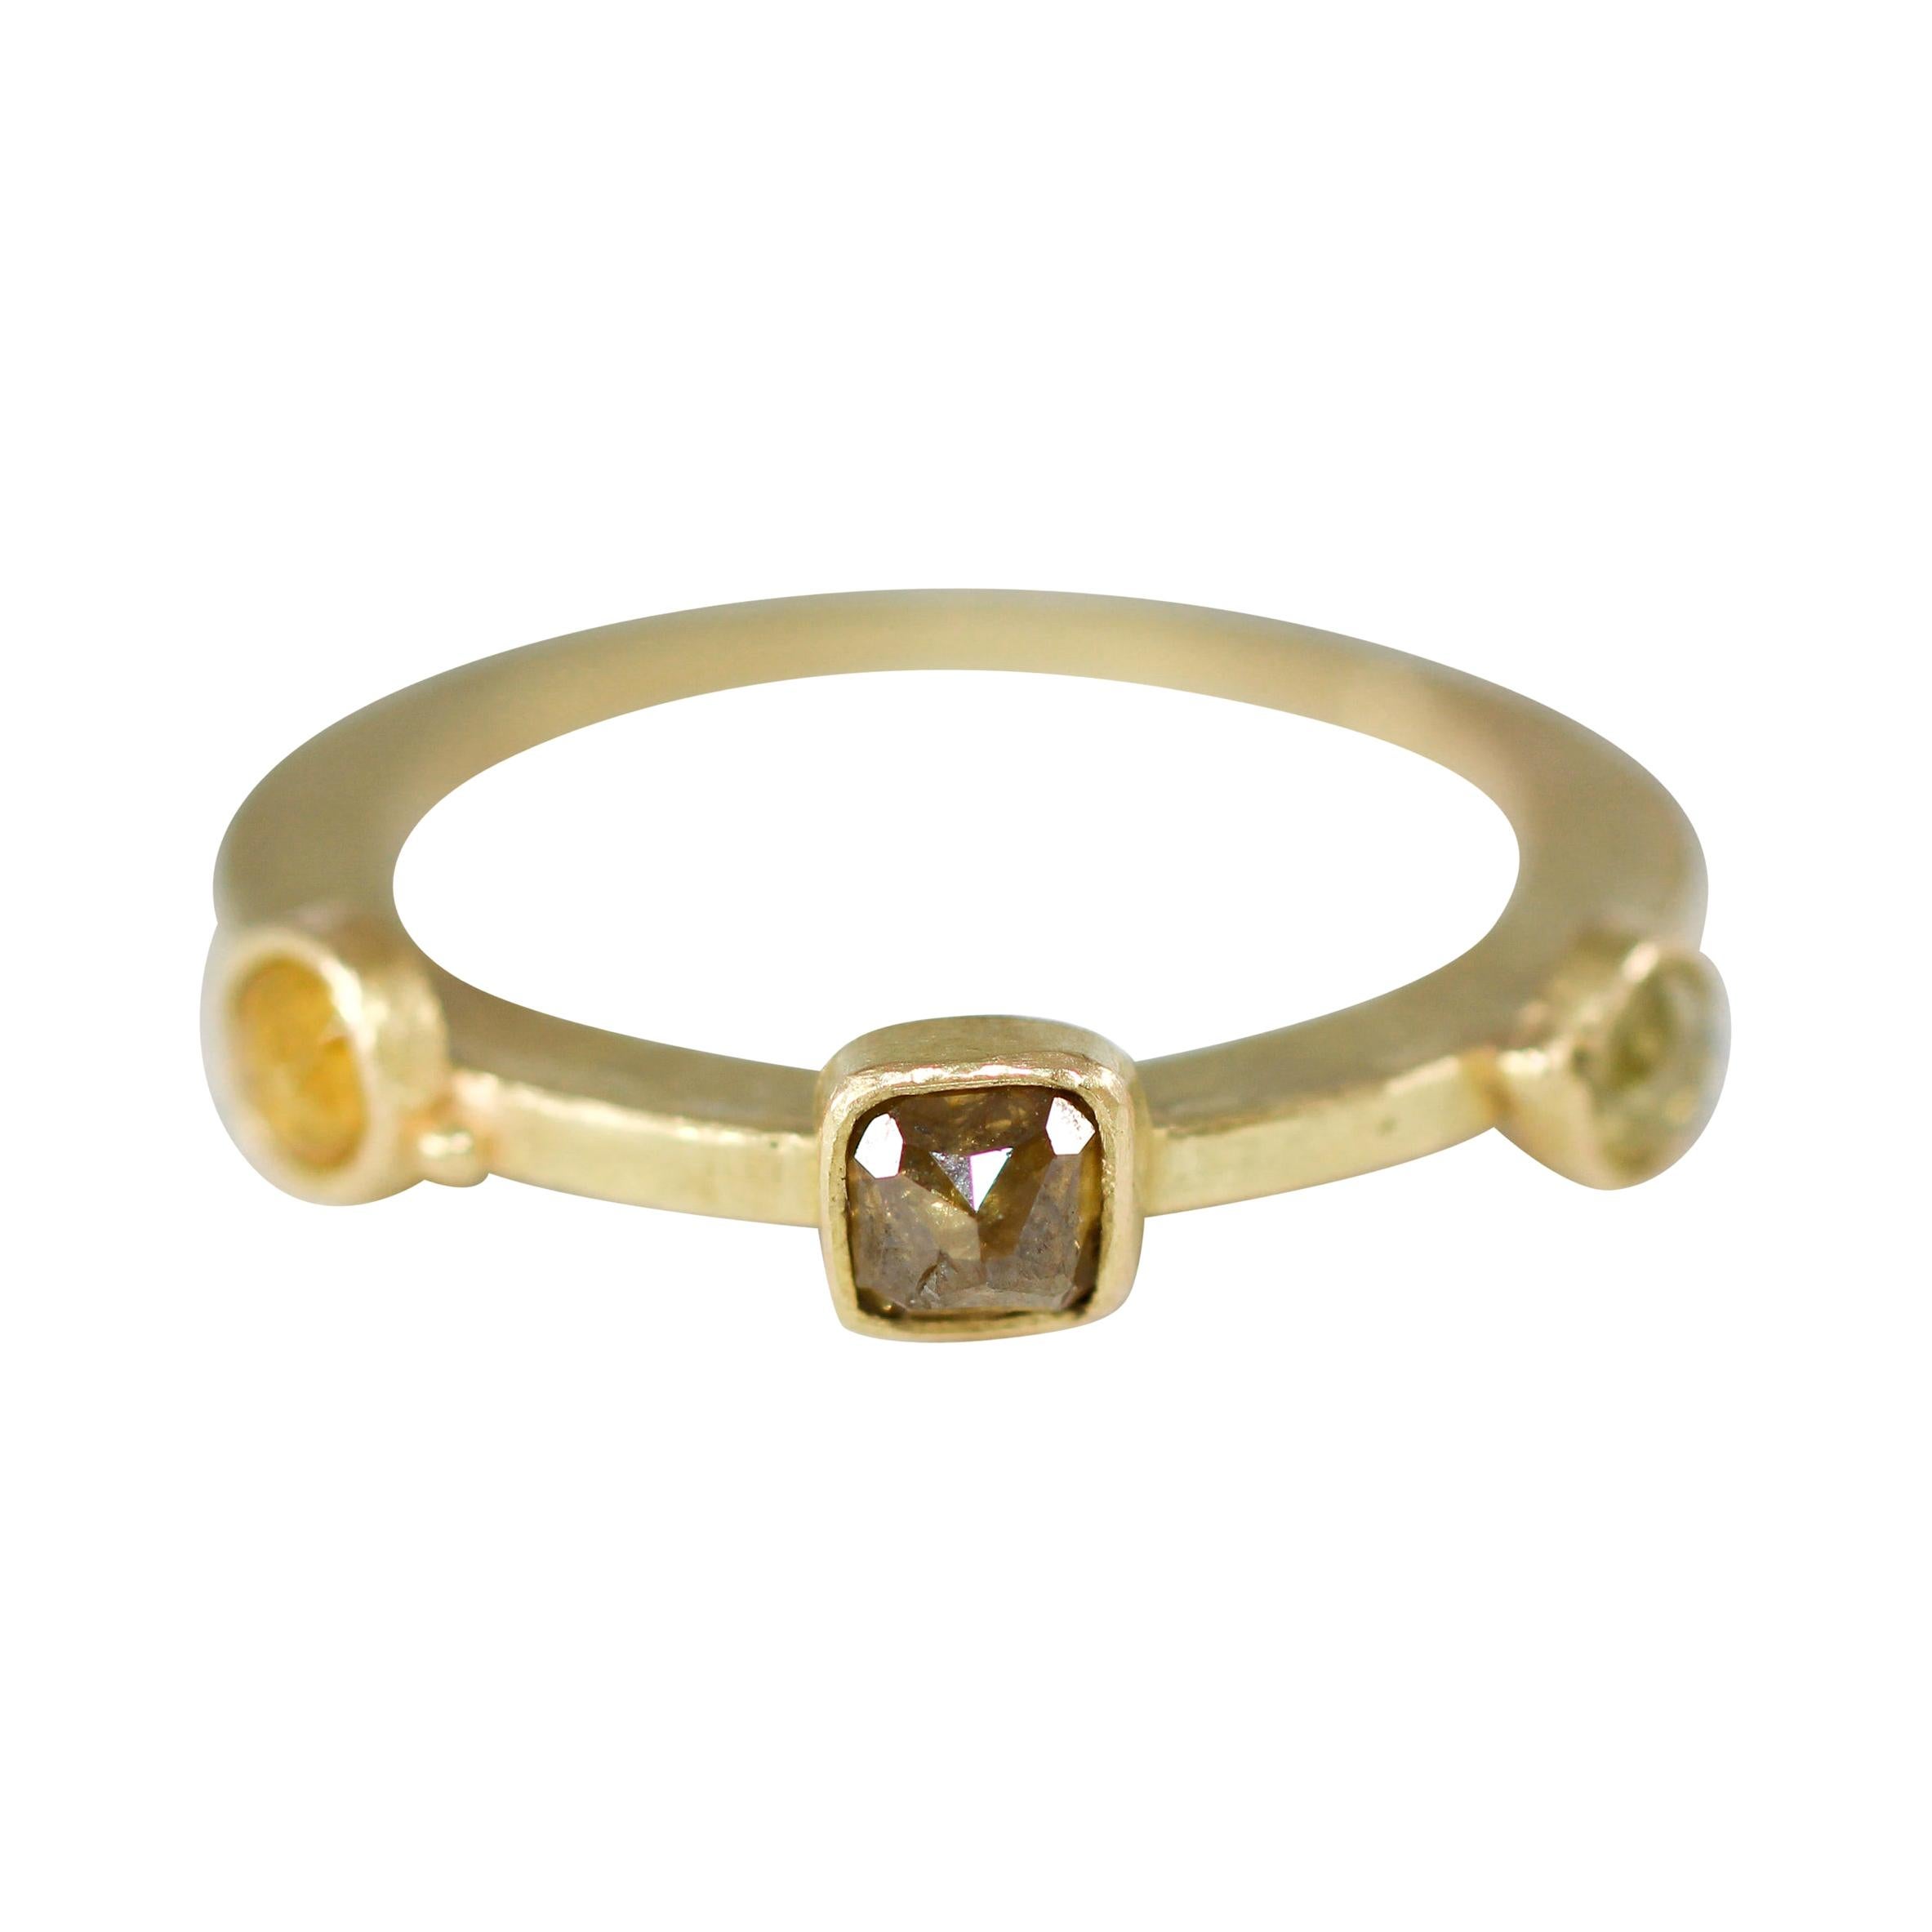 Yellow Brown Diamonds in 18k Gold Fashion Ring and More Gift Ideas